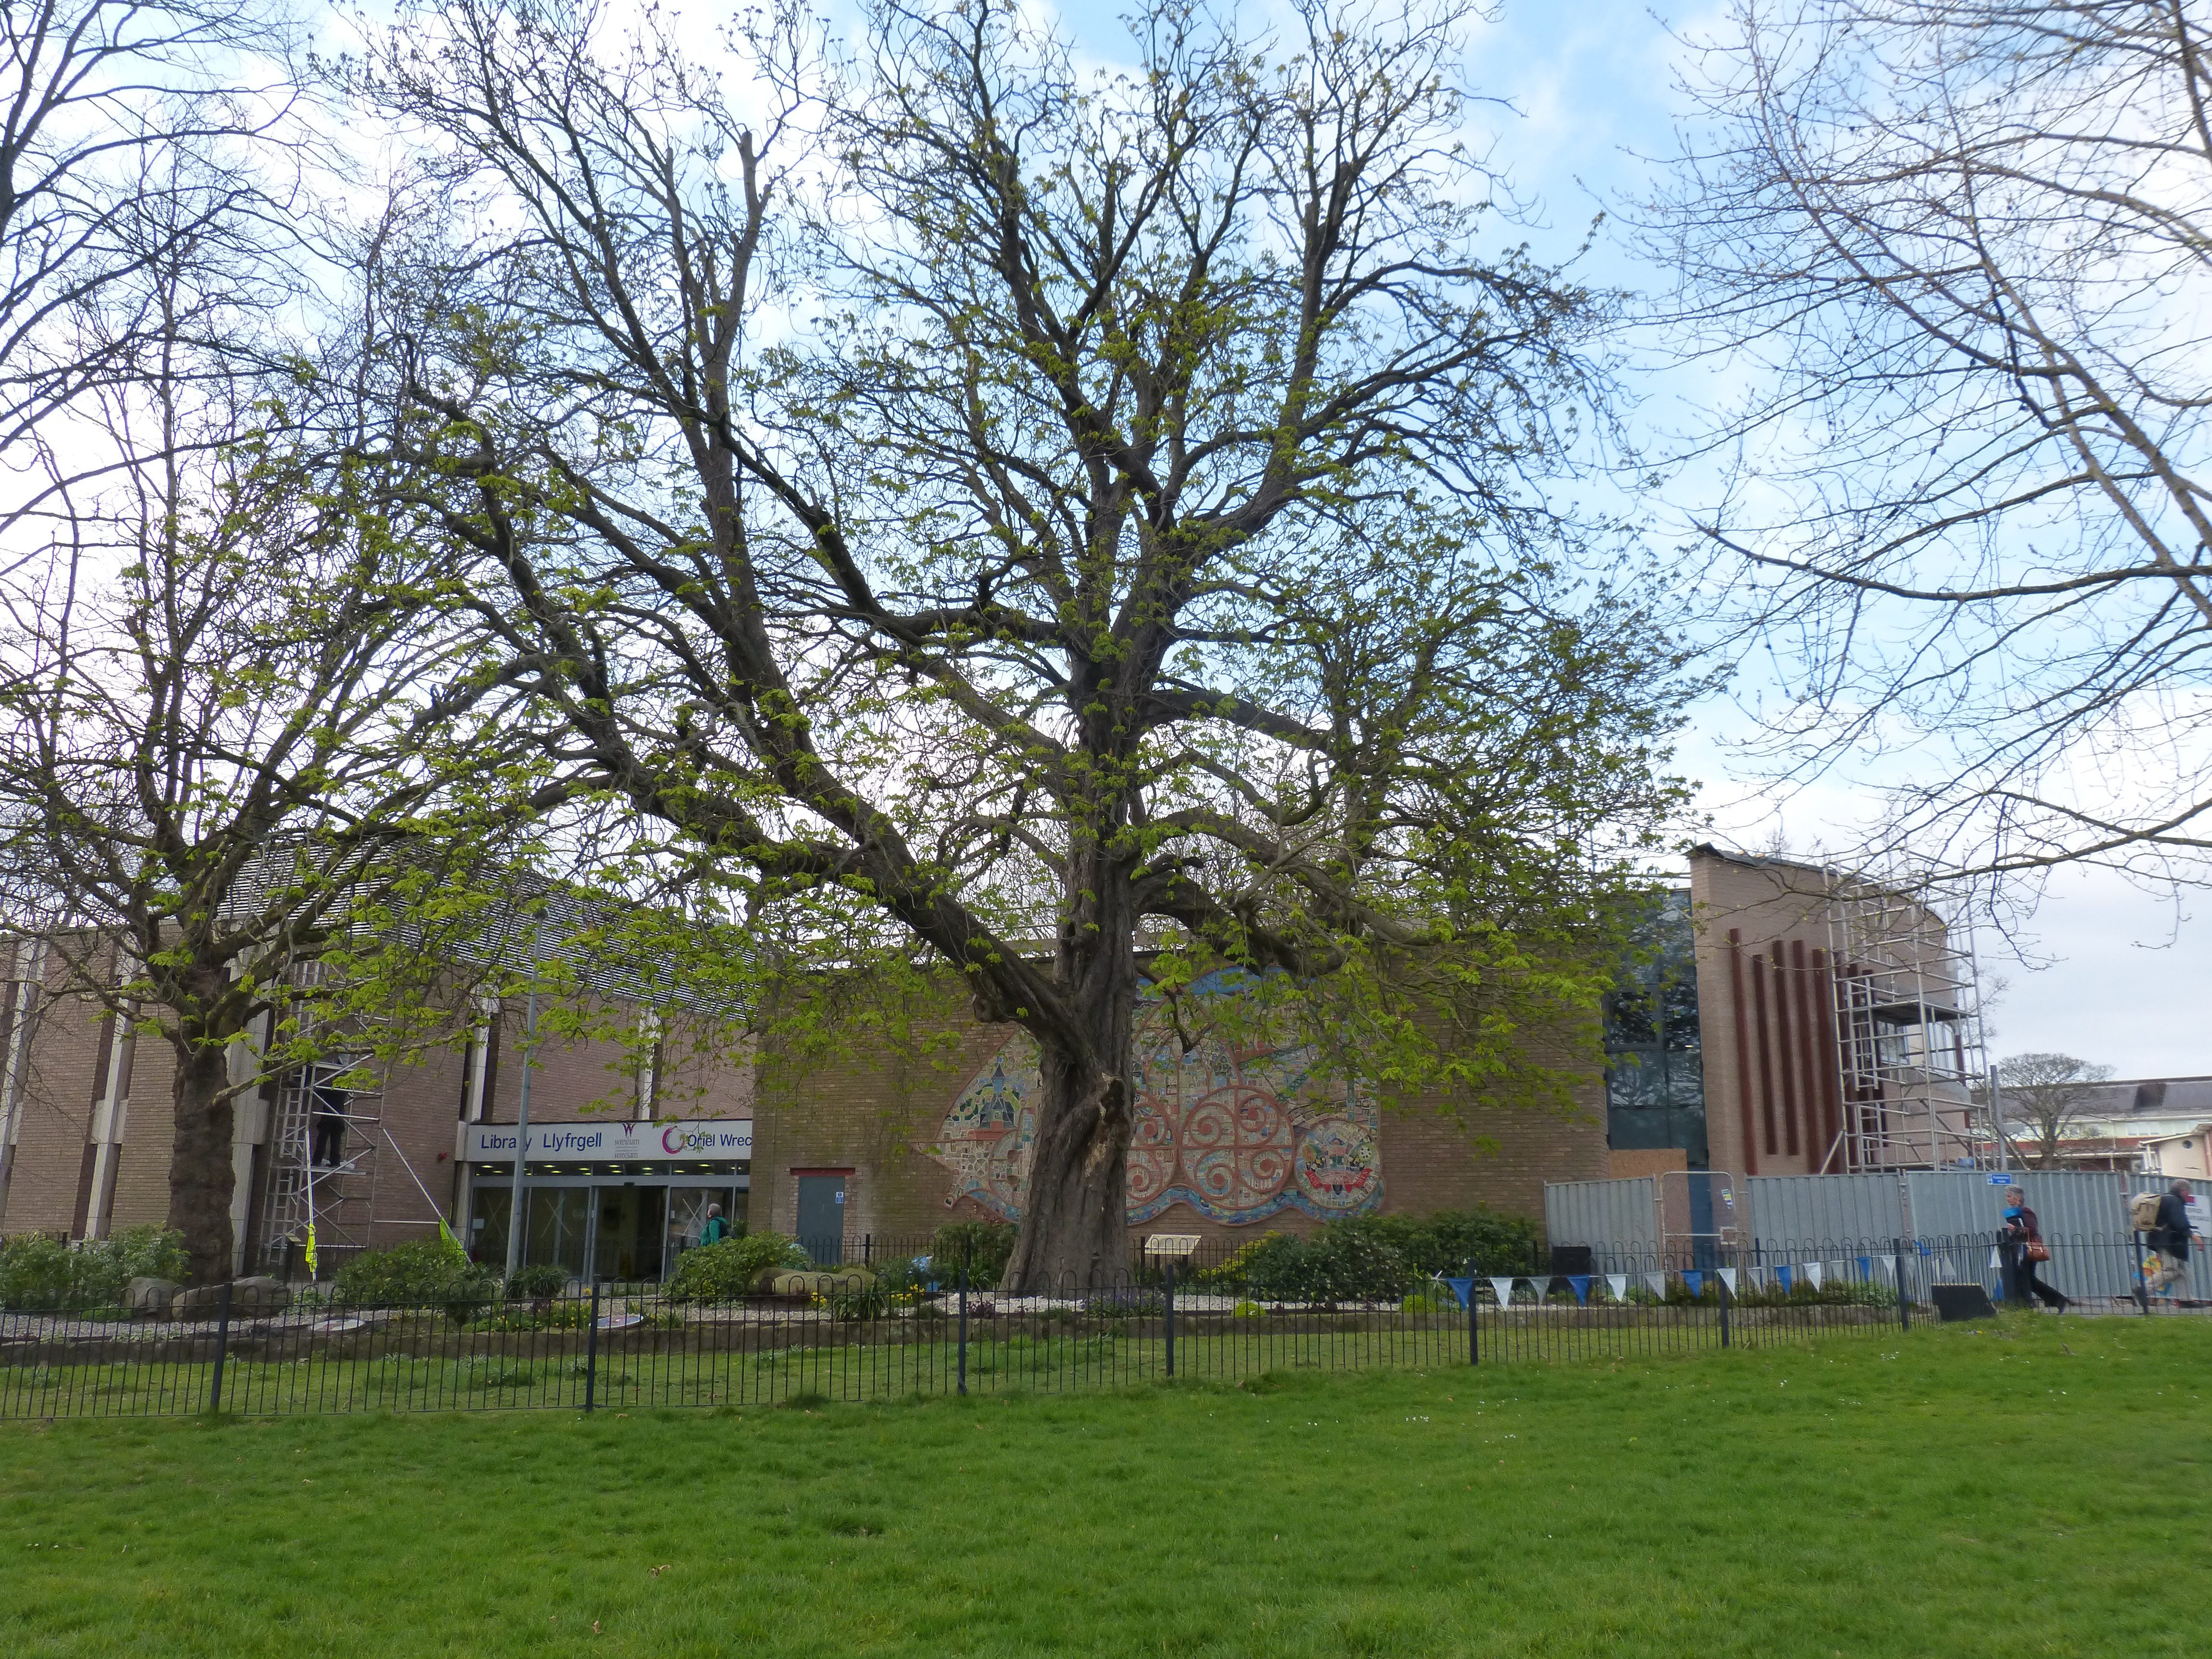 Library Tree to be Felled